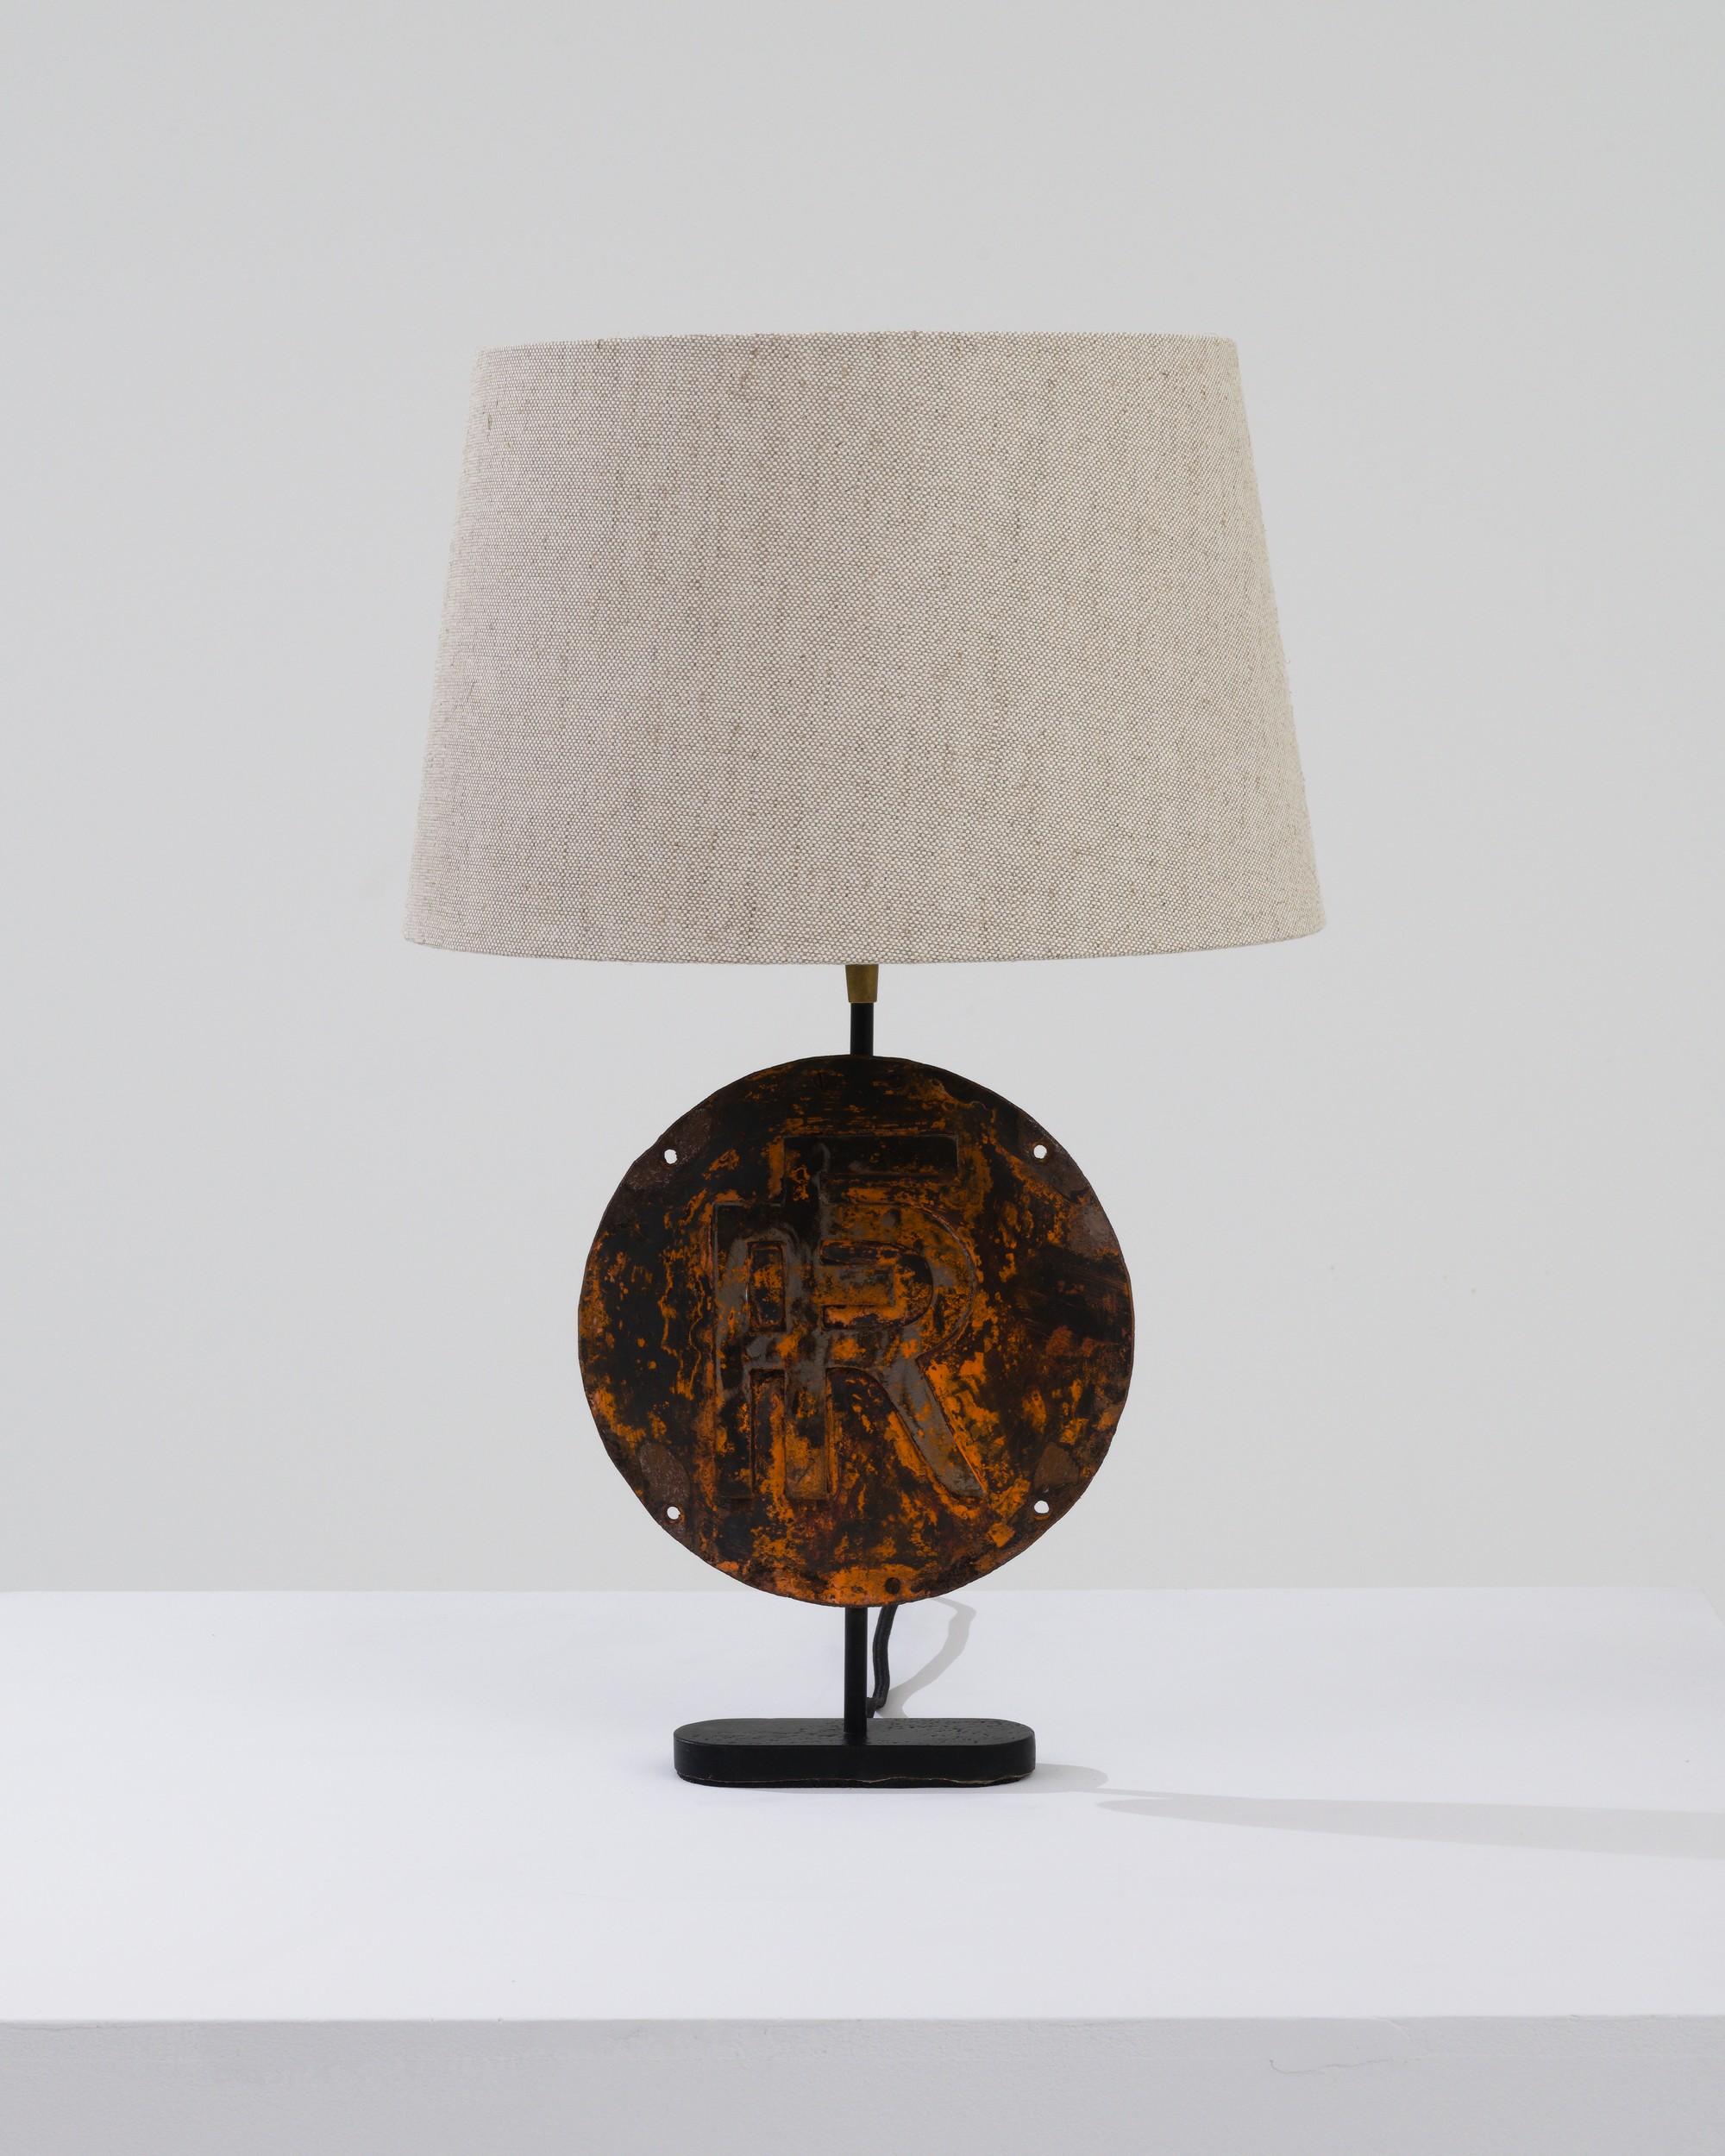 This antique table lamp was crafted in France around the 1900s. The metal base, featuring a circular plate with initials intricately merged, serves as a captivating focal point of this piece. The orange rust on the metal creates a striking marbled